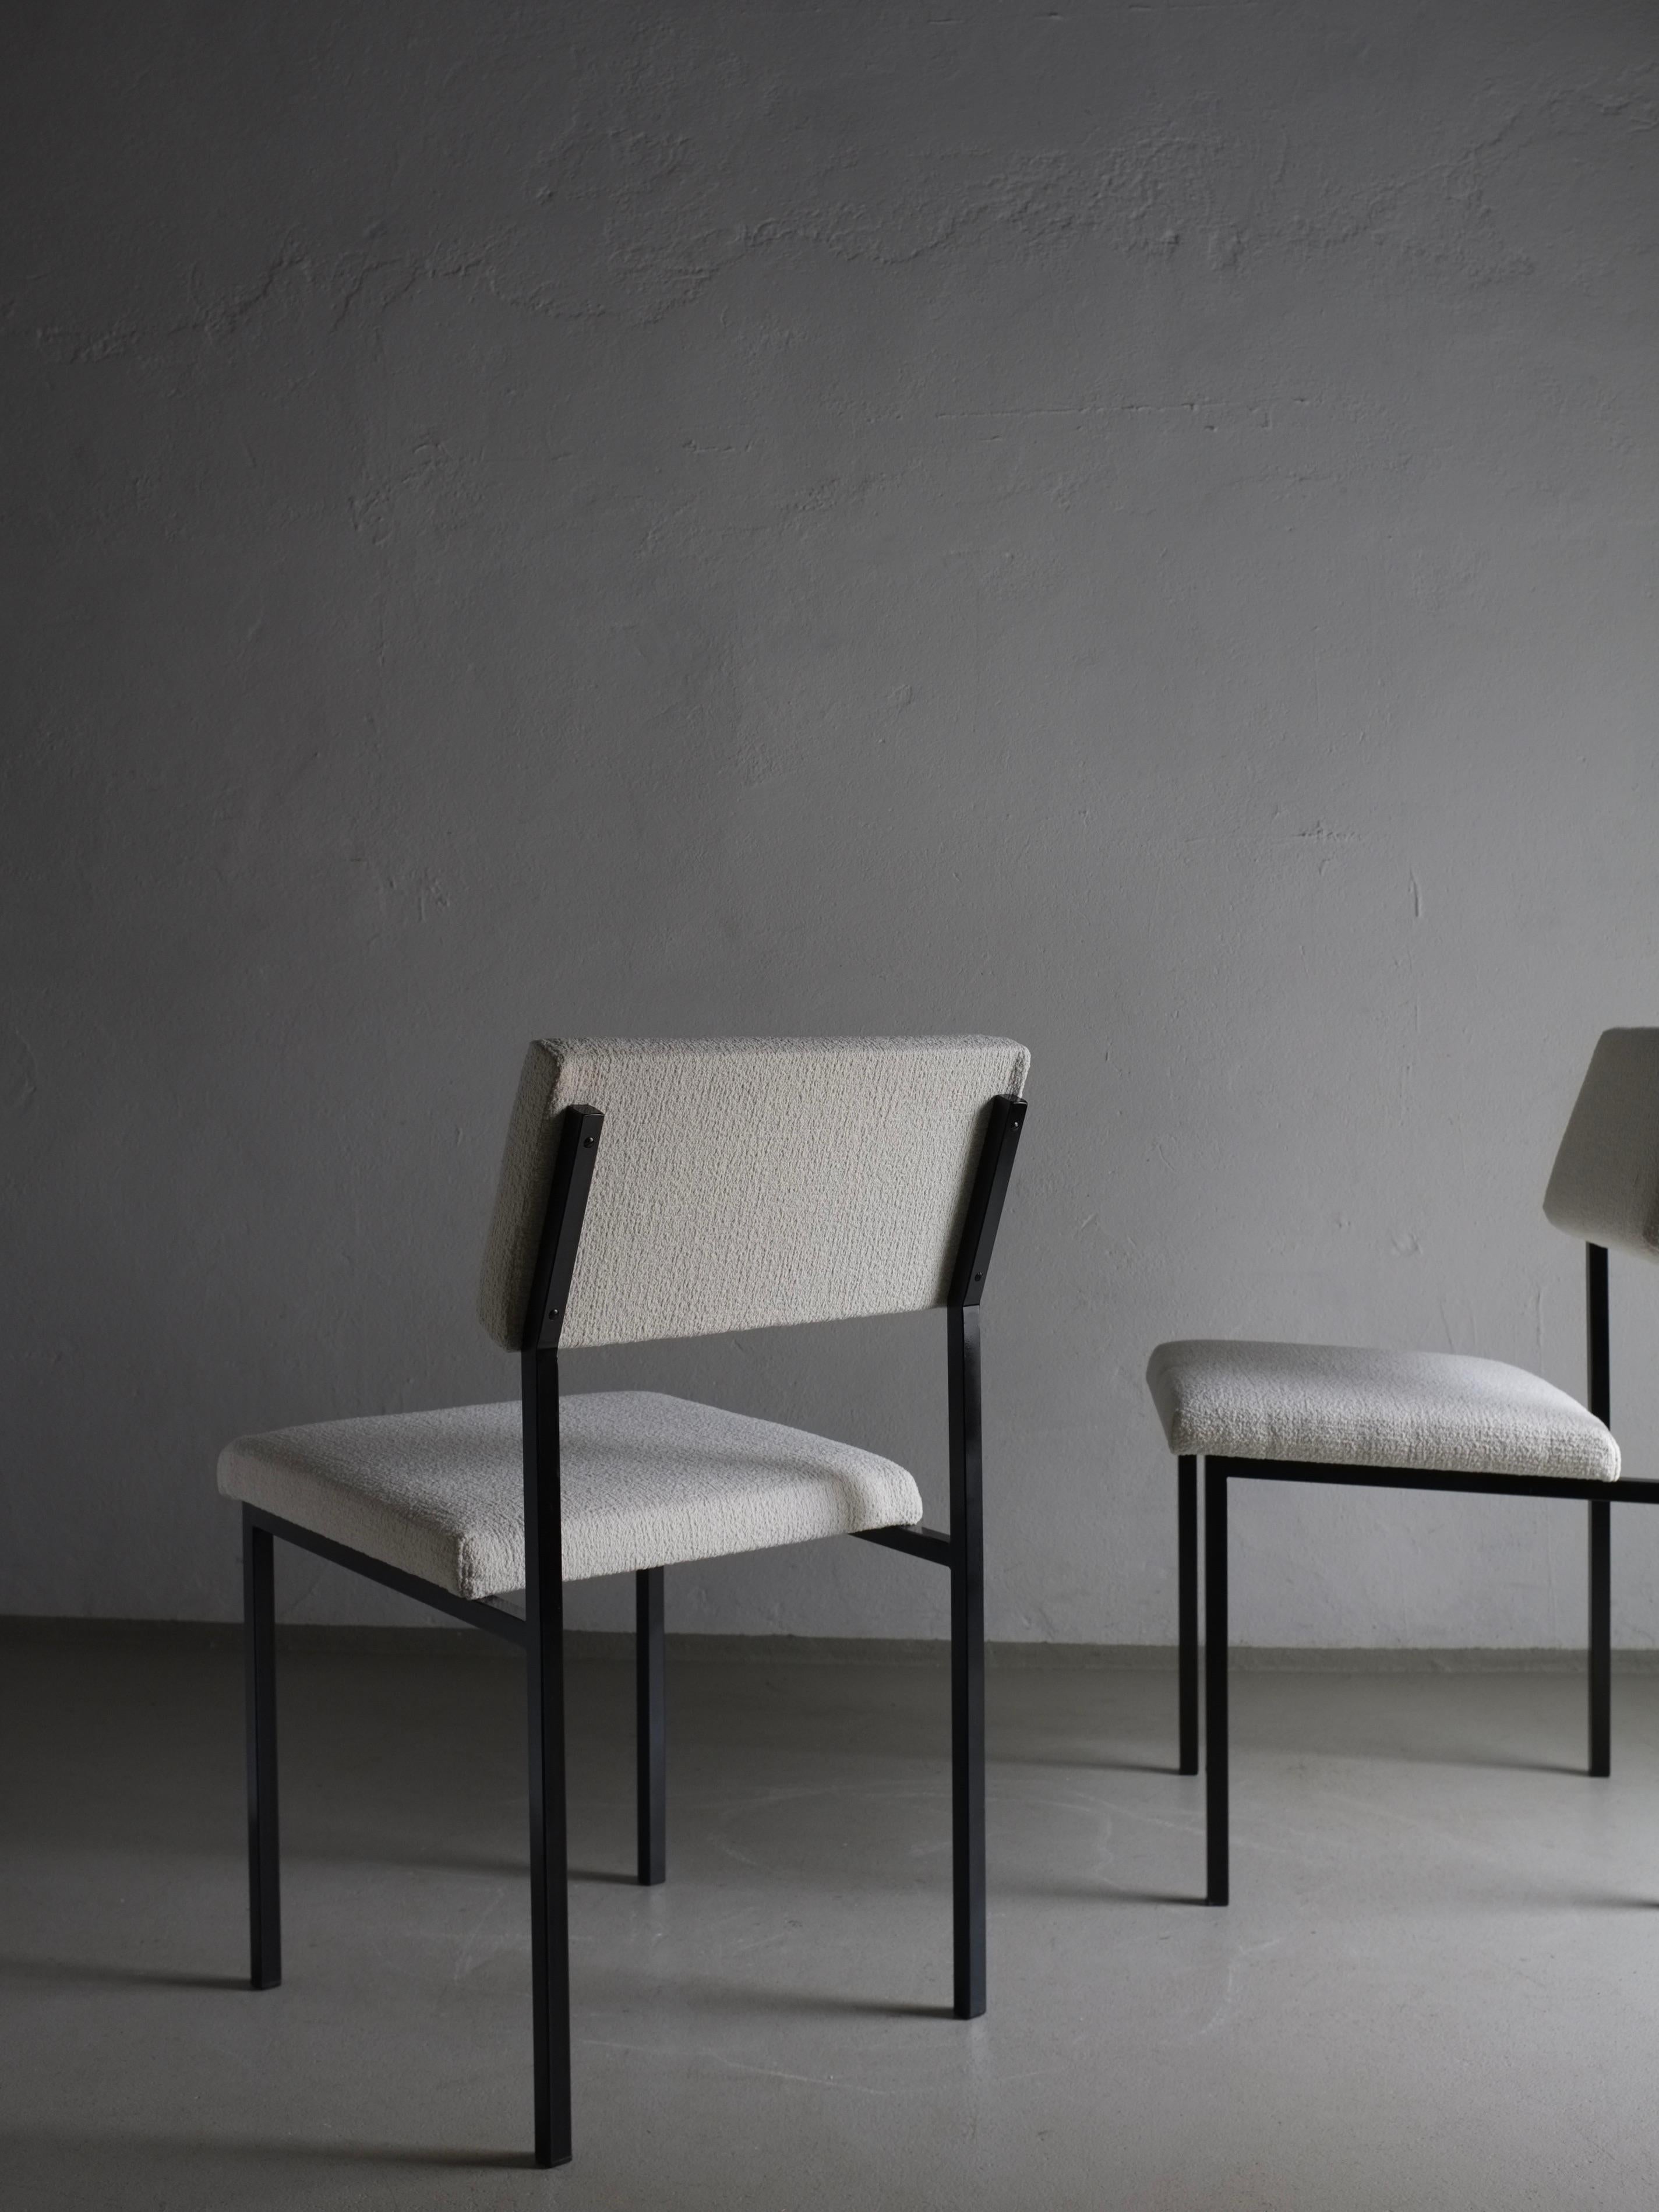 Minimalist White Boucle Black Metal Chairs, Kembo, Netherlands 1960s For Sale